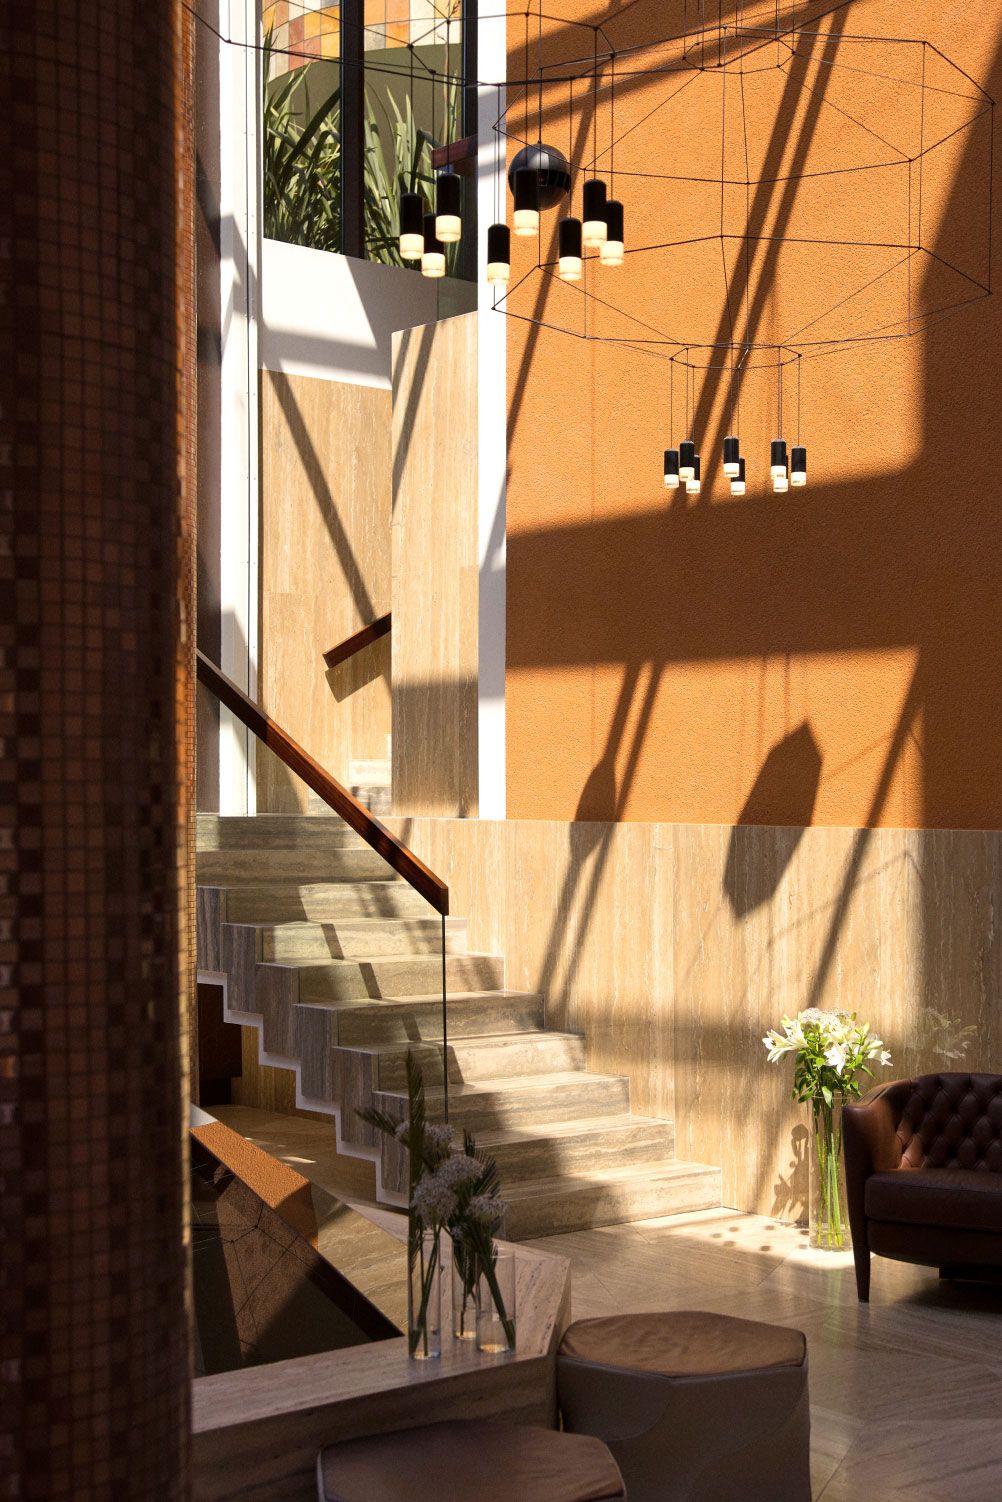 A modern atrium with natural light casting shadows on the warm-toned walls, featuring a staircase, hanging pendant lights, and a cozy seating area